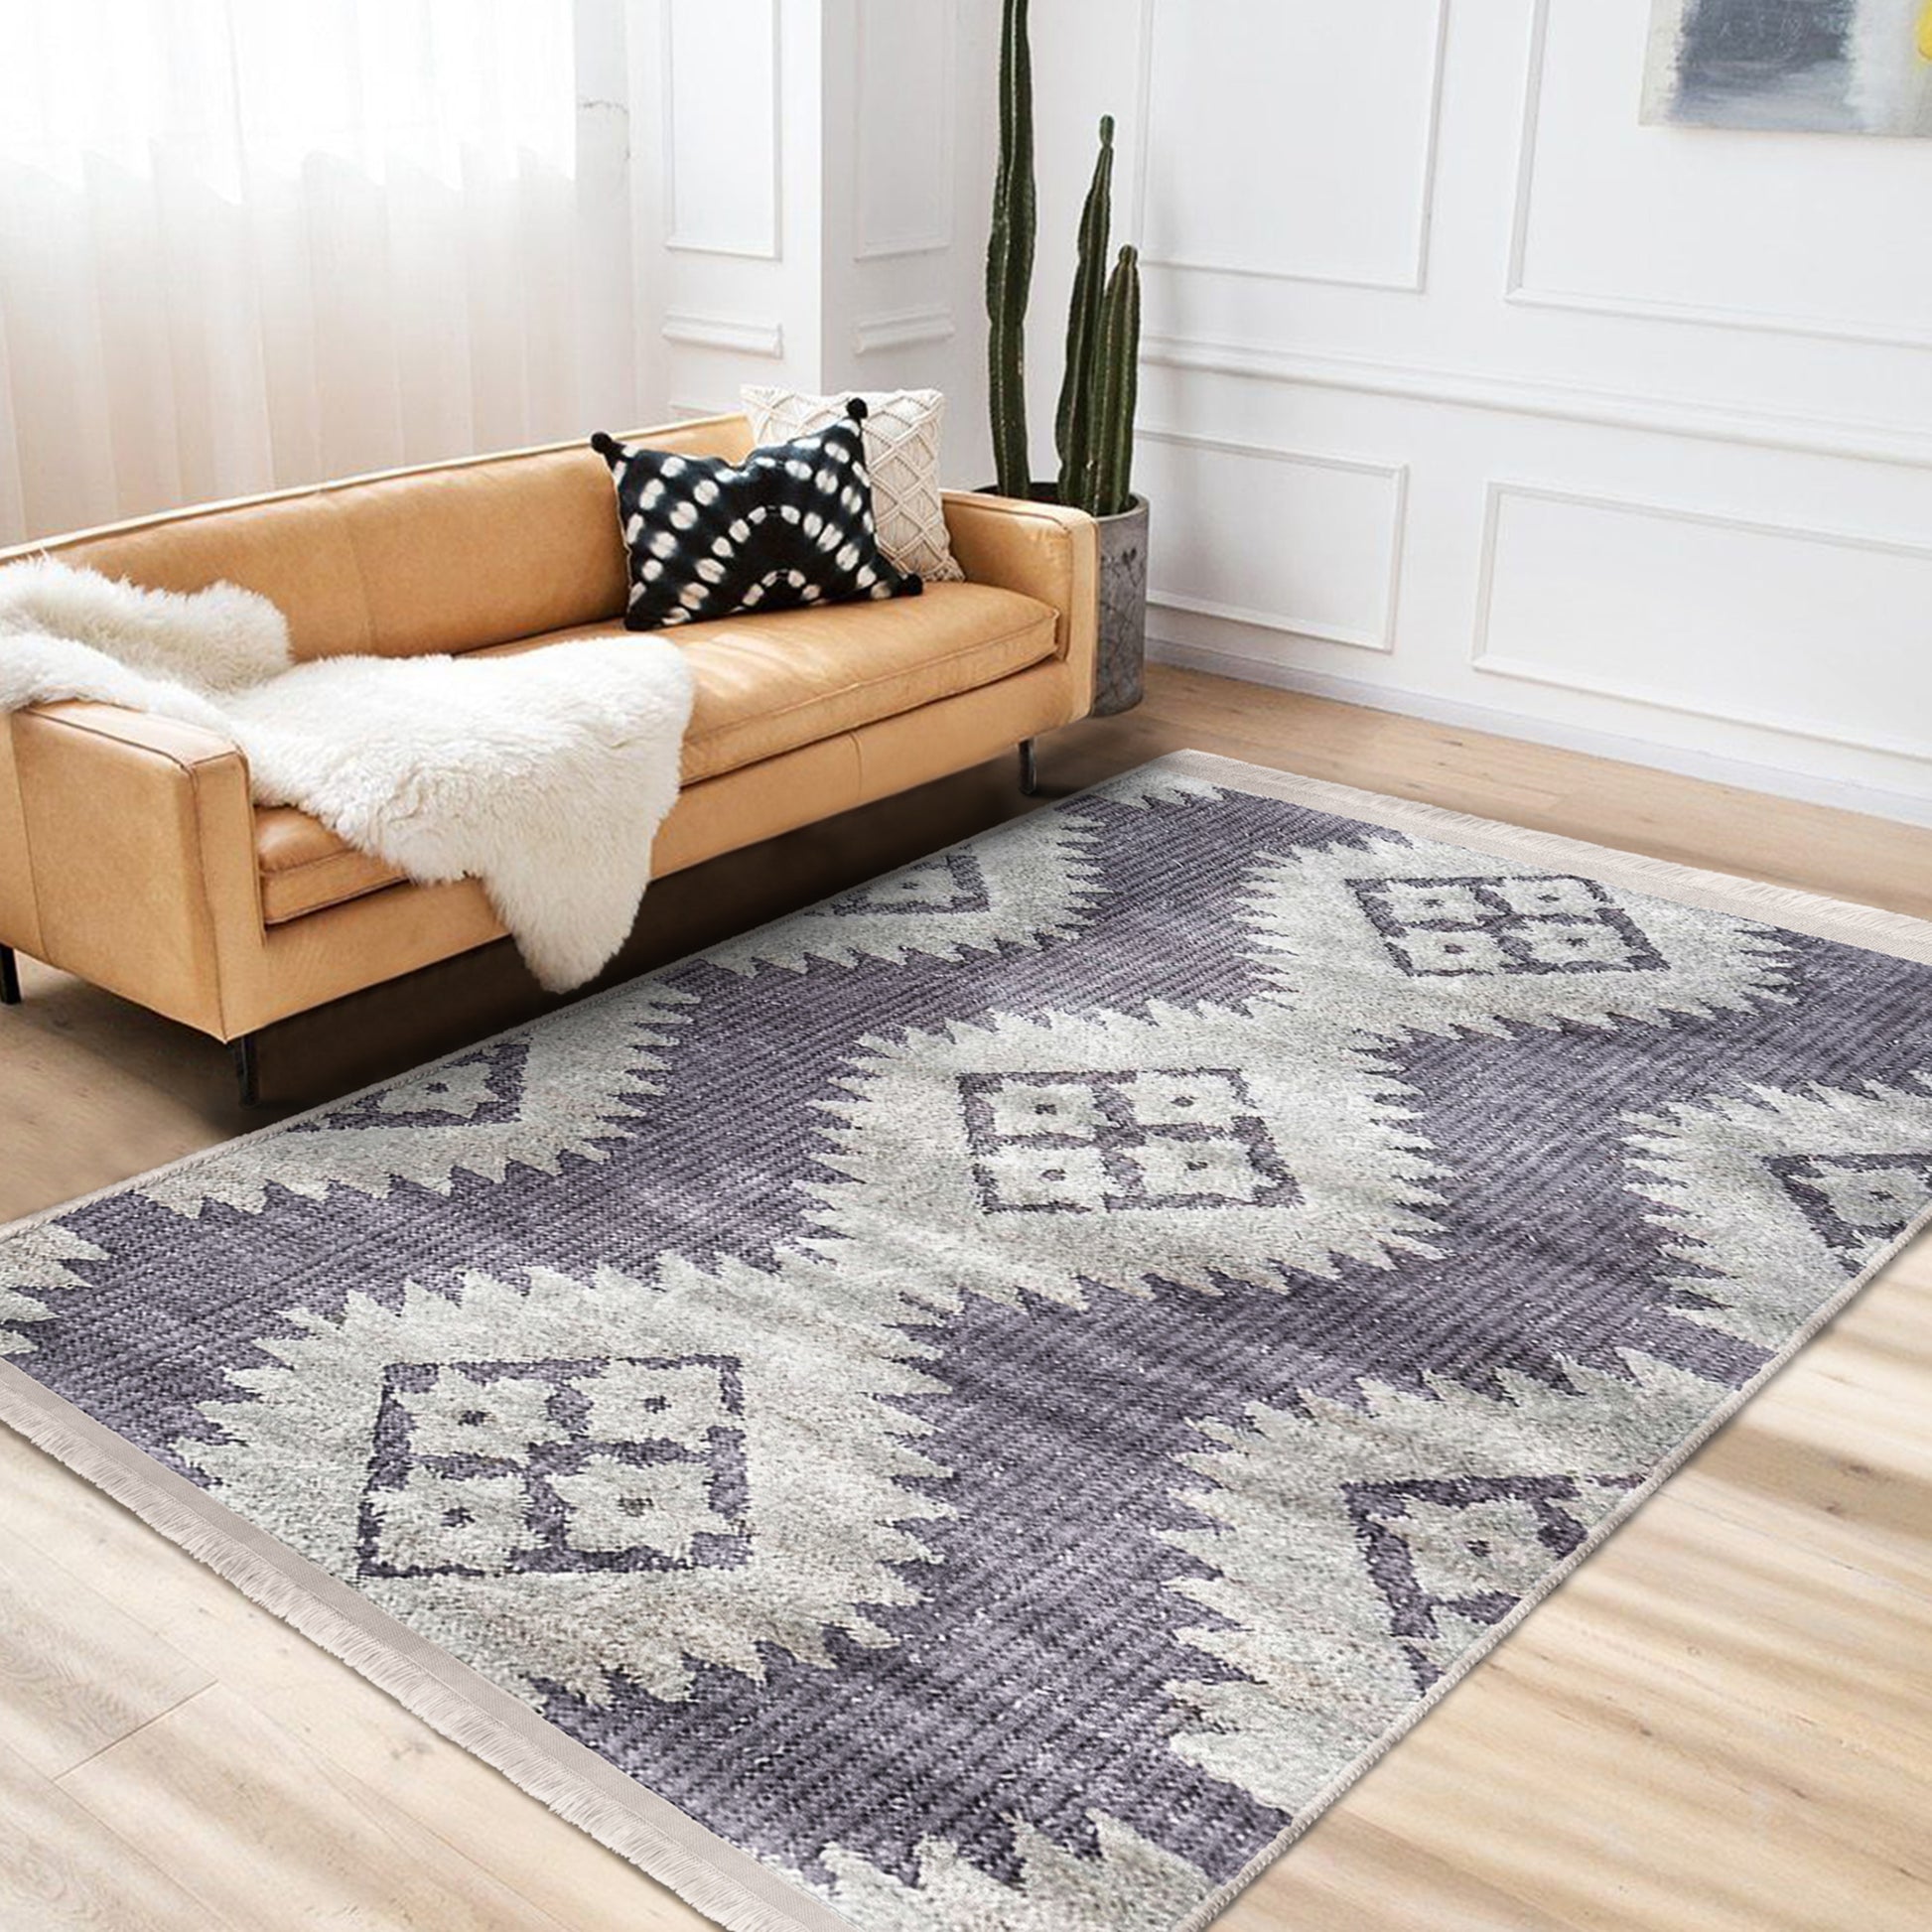 Timeless Comfort: Cozy Home Washable Rug